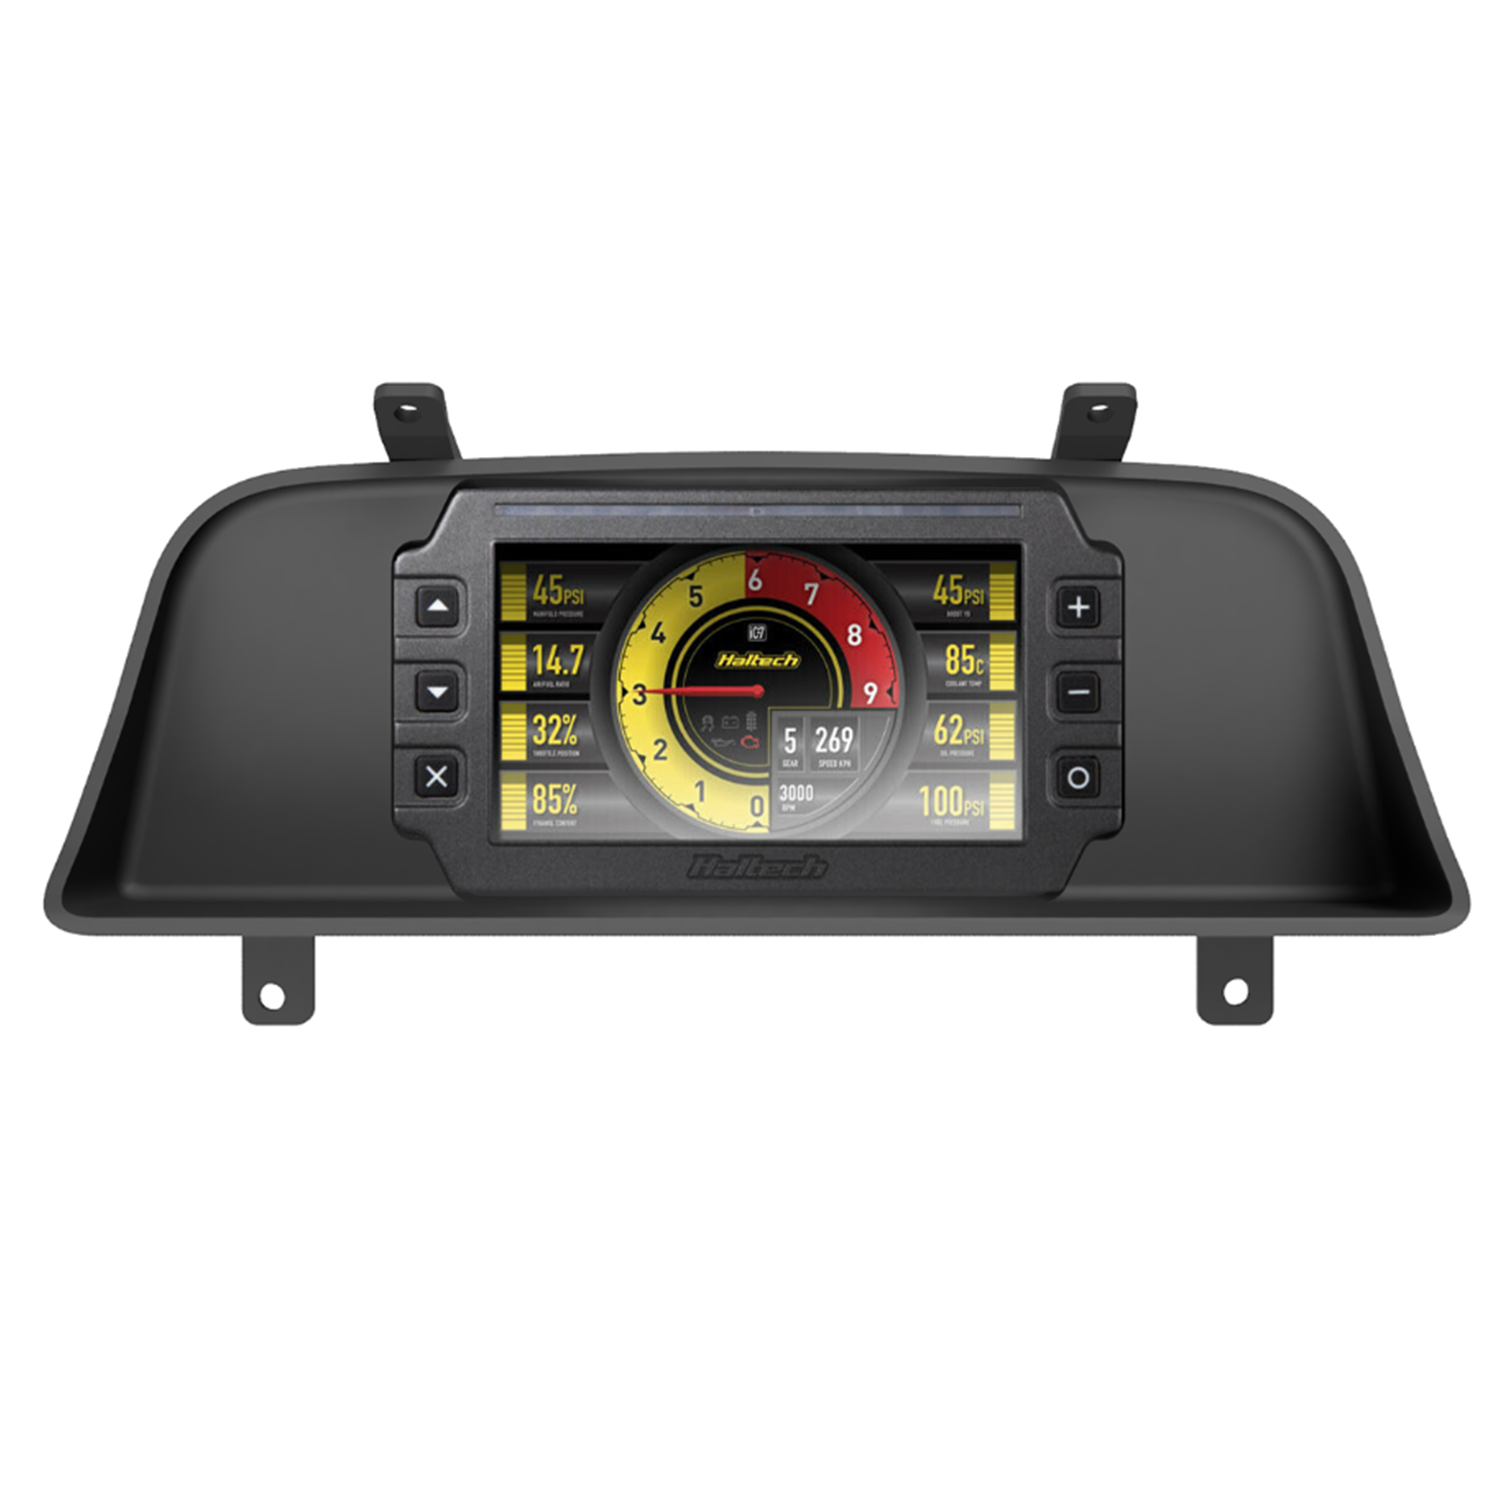 Toyota Land Cruiser 80 Series Dash Mount Recessed for the Haltech iC-7 (display not included)